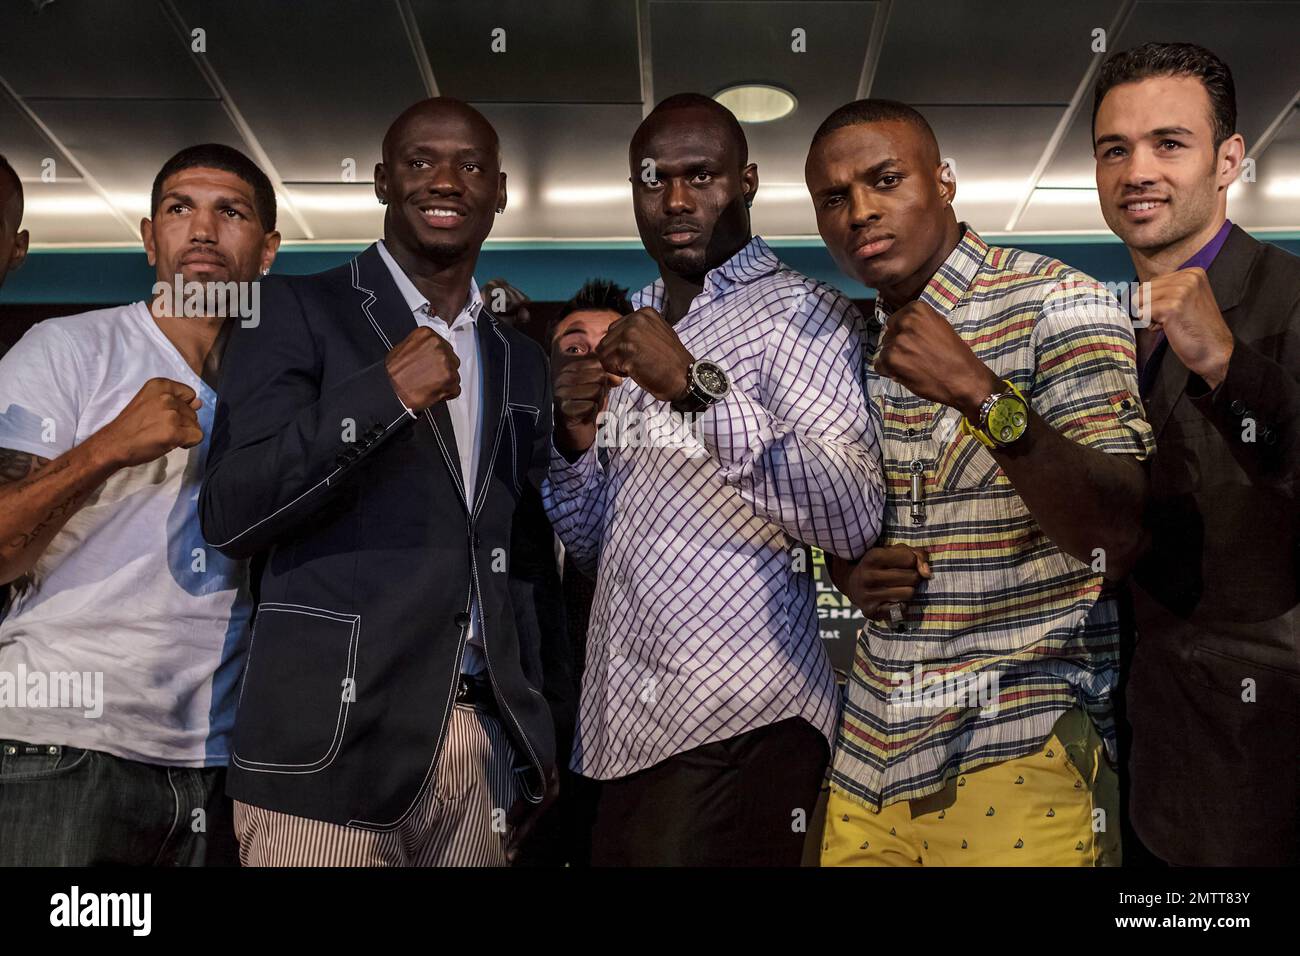 Boxer Ronald 'Winky' Wright (FL), Former light heavyweaight kingpin and ShowTime ringside boxing analyst Antonio 'Magic Man' Tarver (L), unbeaten power puncher Lateef 'Power' Kayode (C), Boxer Peter 'Kid Chocolate' Quillin (R) and Boxer DvinRodriguez (FR) at the Home Depot Center Press Conference. Carson, CA. 31st May 2012. Stock Photo